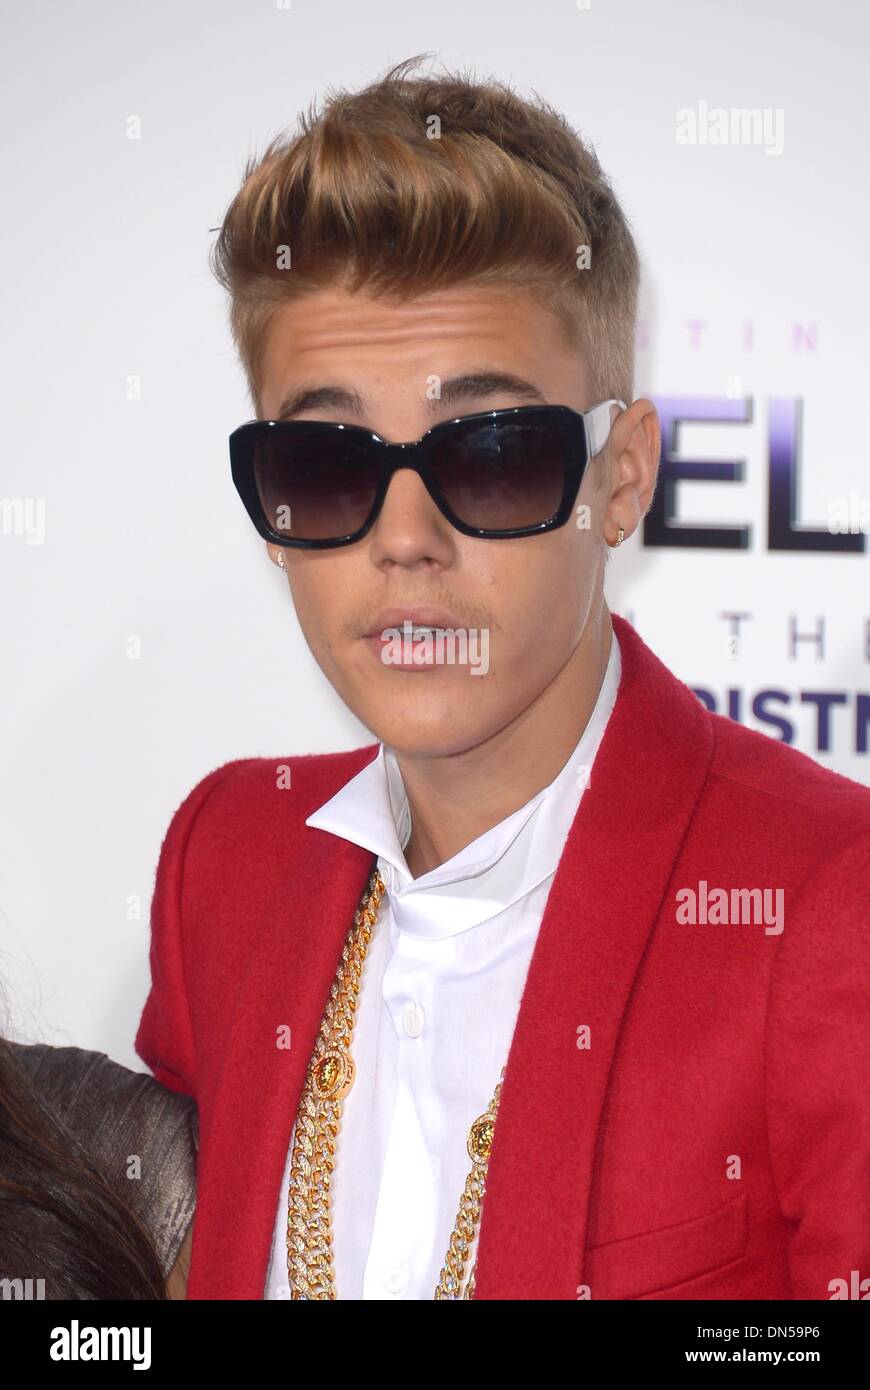 Los Angeles, California, USA. 18th December 2013. Justin Bieber arrives at the premiere for 'Believe' in Los Angeles, CA December 18th 2013 Credit:  Sydney Alford/Alamy Live News Stock Photo